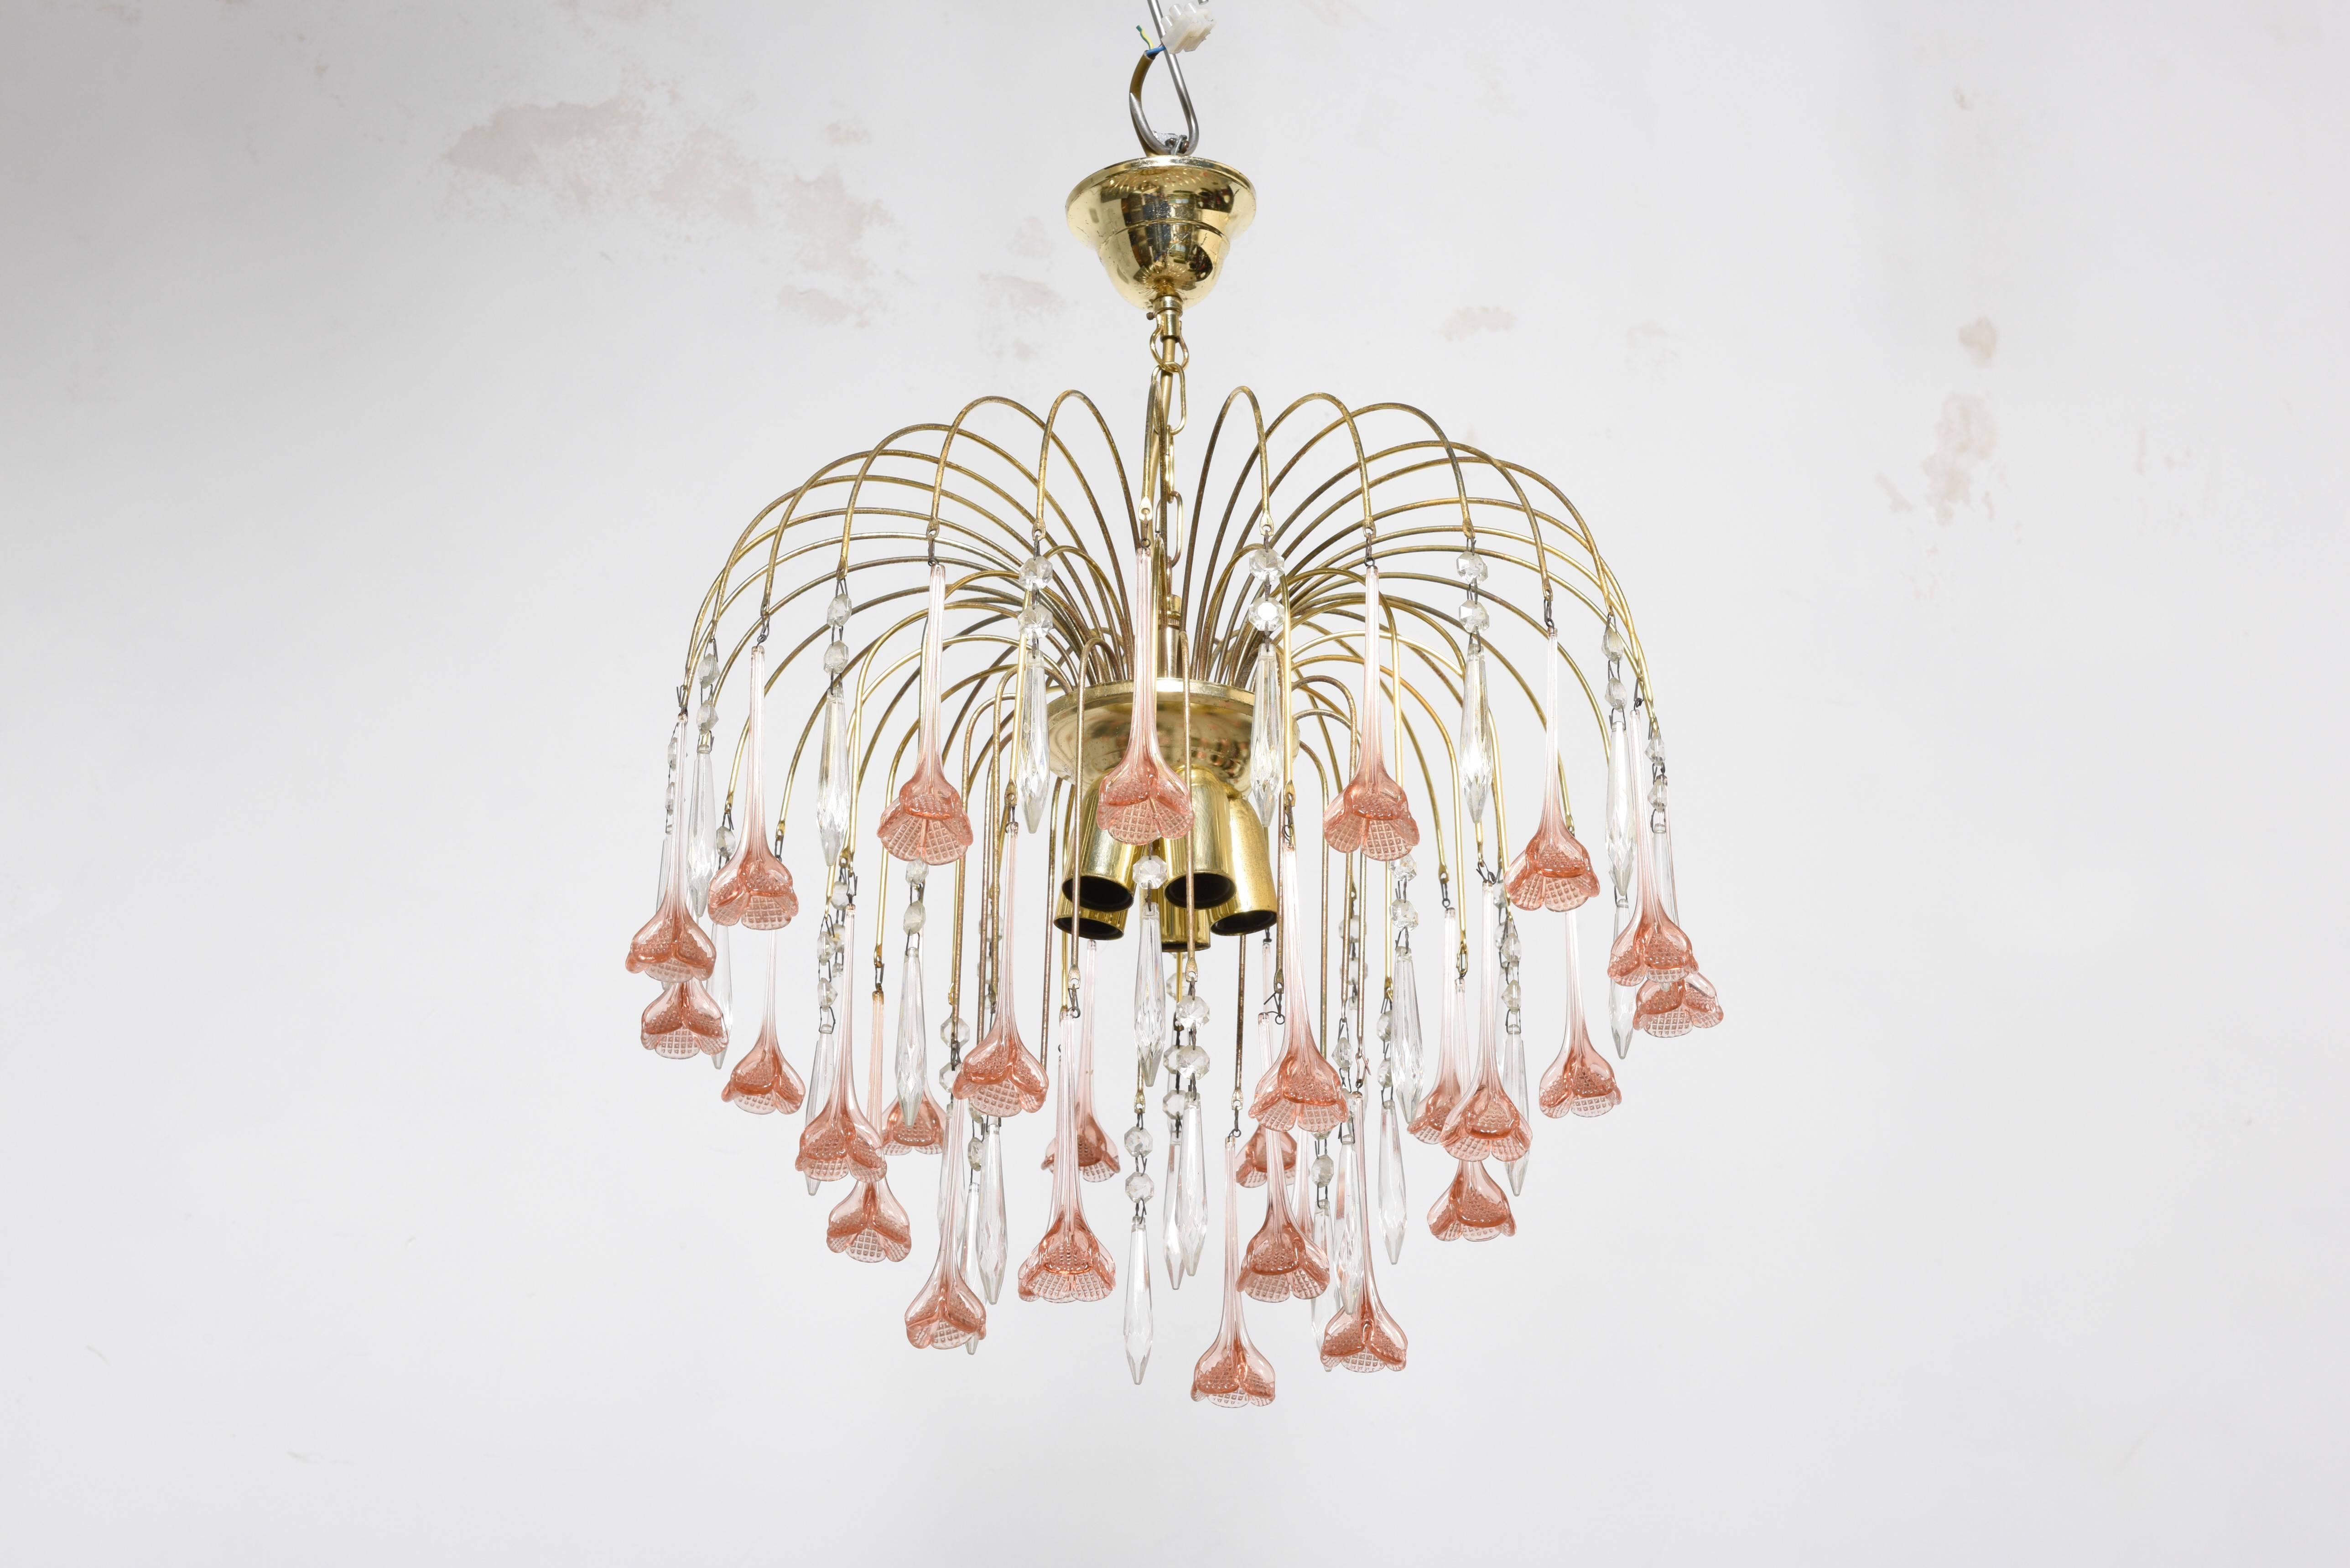 Very elegant and great quality, vintage midcentury chandelier.
This piece has a brass frame with clear Murano crystals and pink blossoms.
In good working condition.